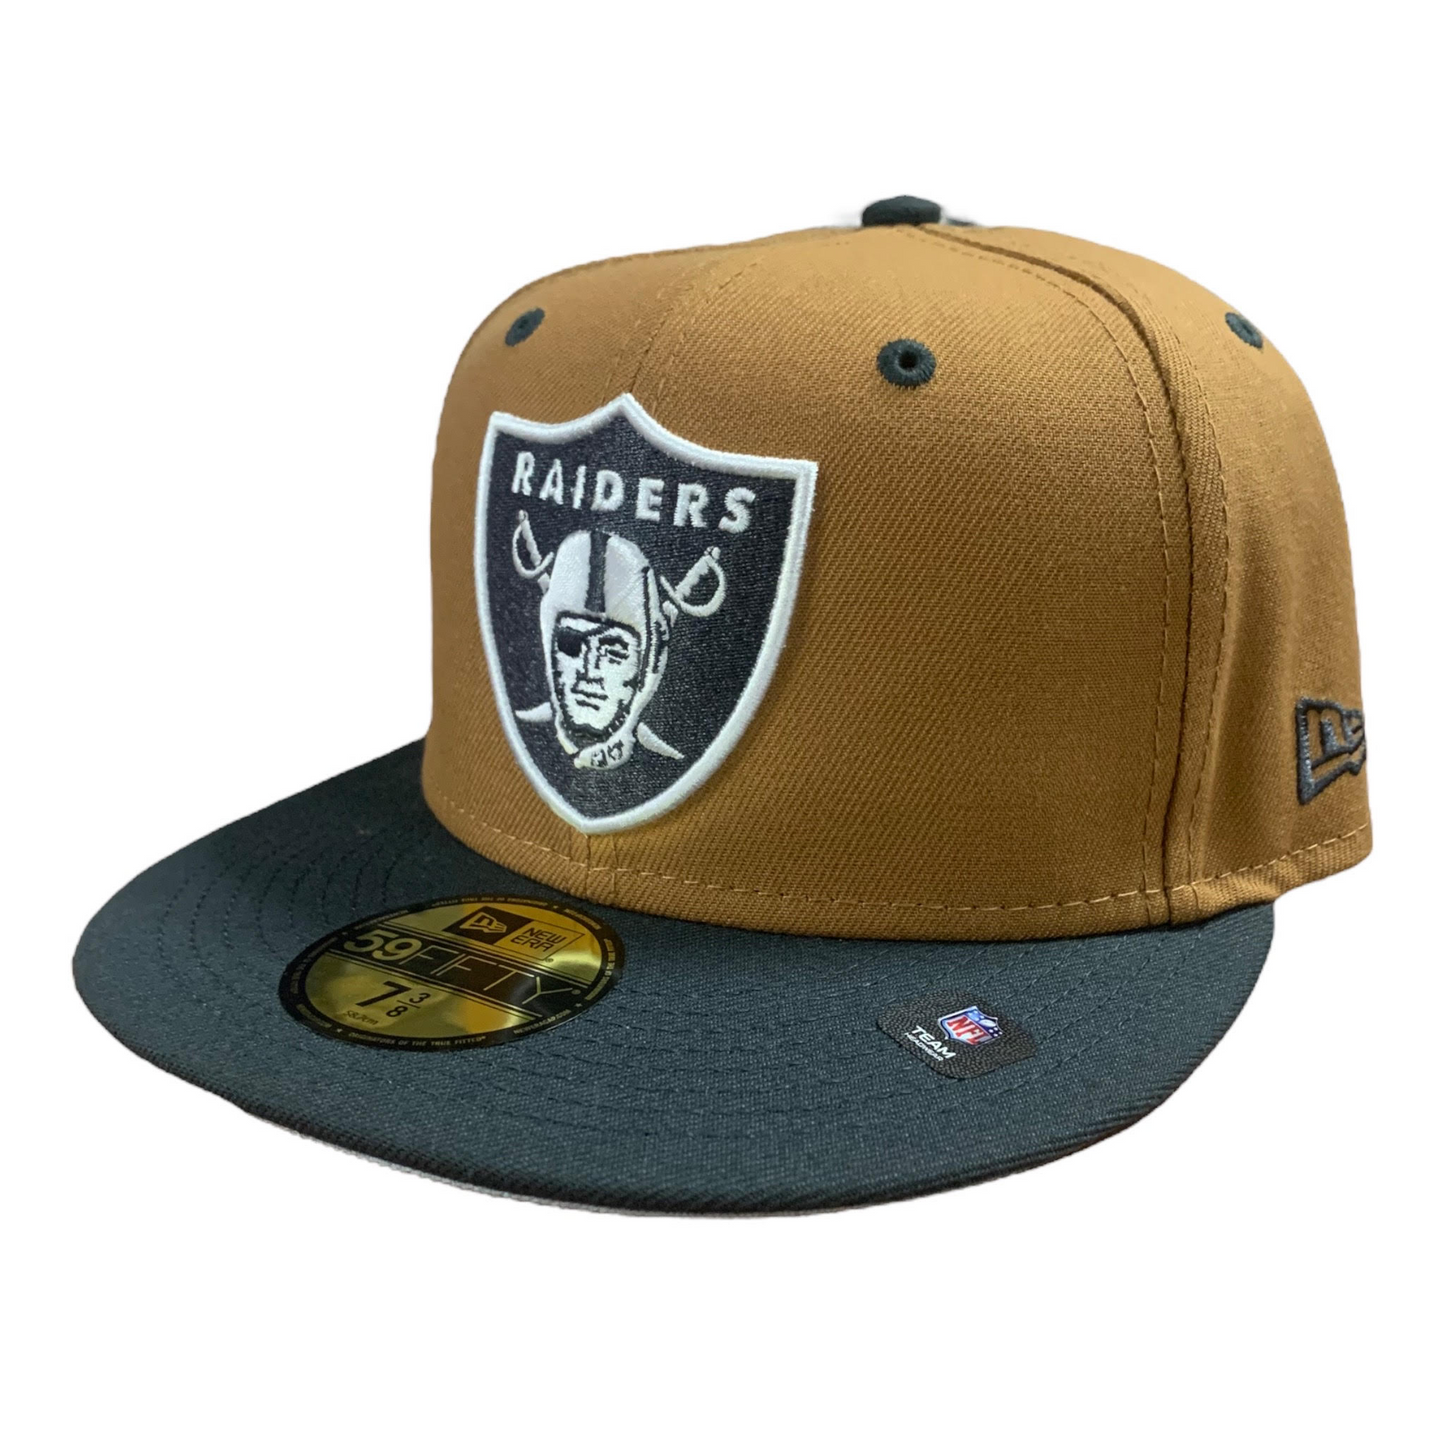 LAS VEGAS RAIDERS 2-TONE COLOR PACK 59FIFTY FITTED HAT - BROWN/ CHARCOAL